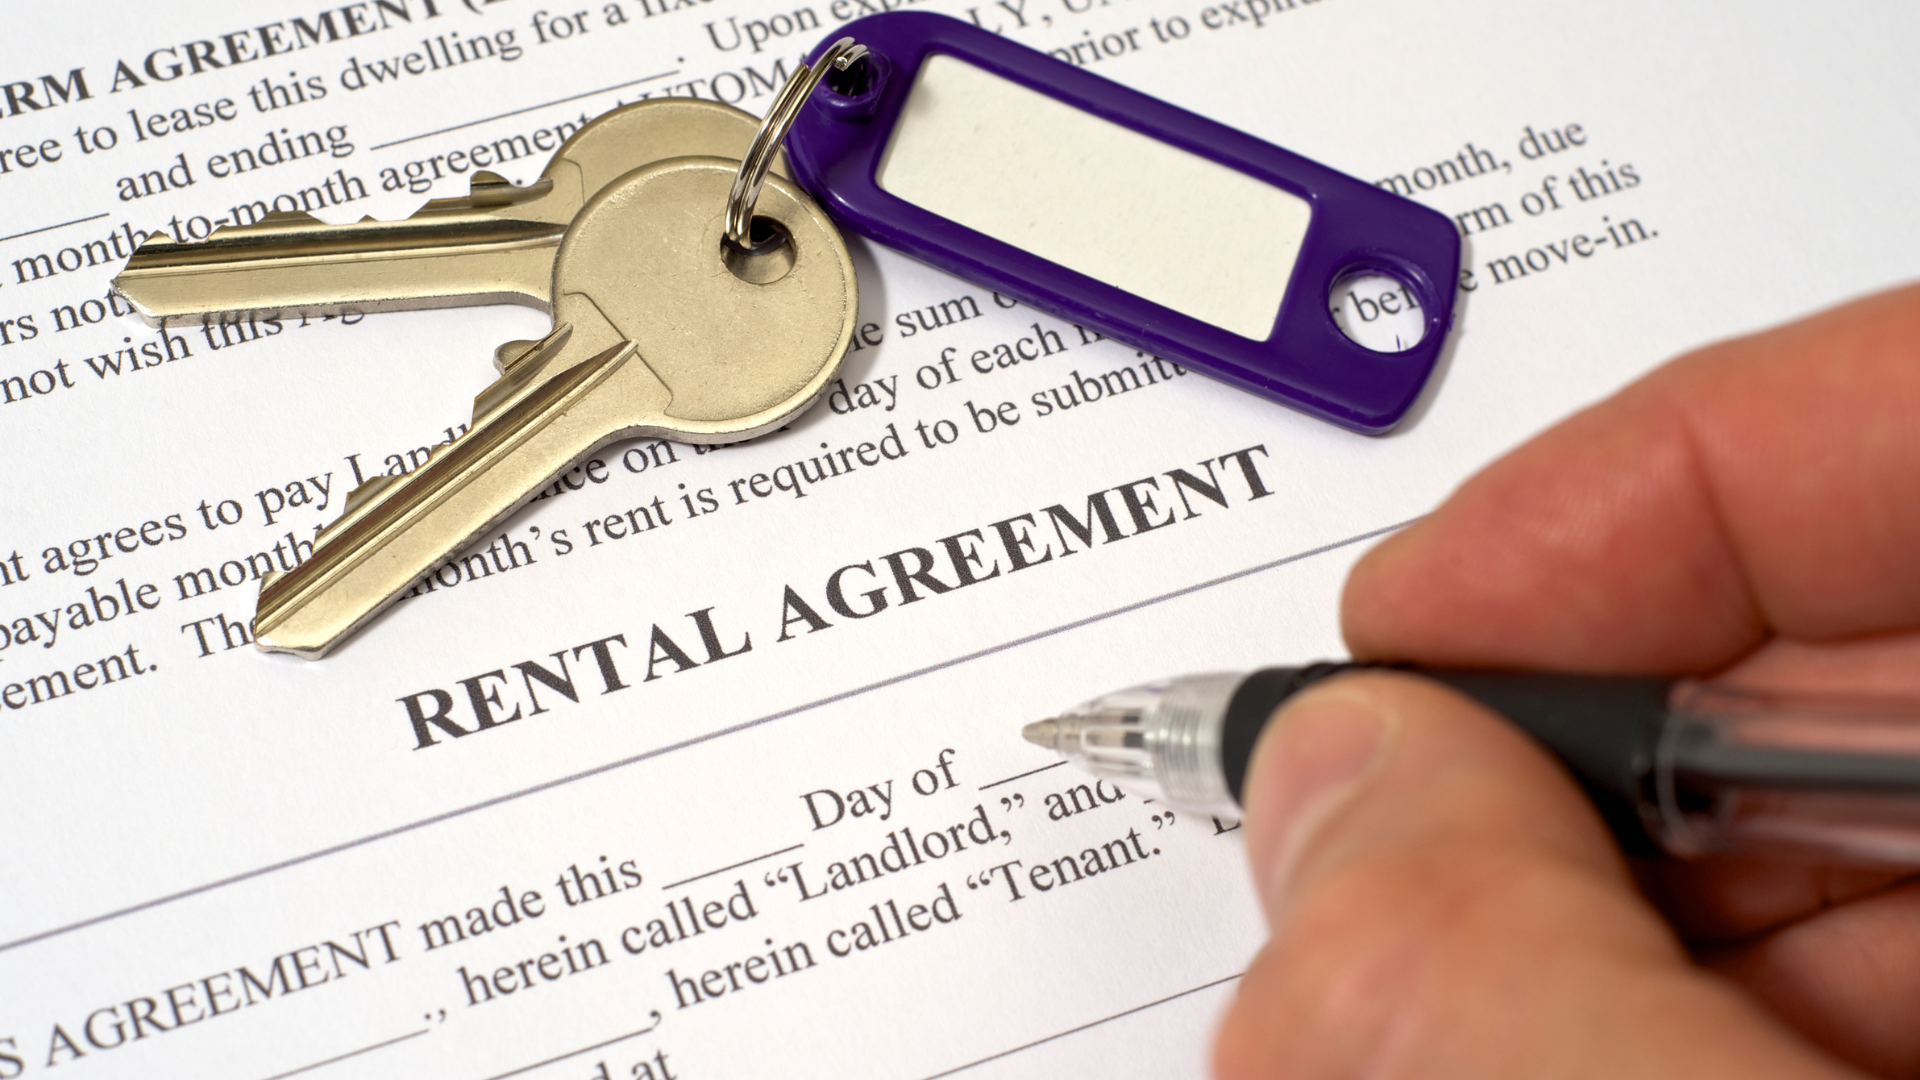 An image of a small business owner signing rental agreement documents